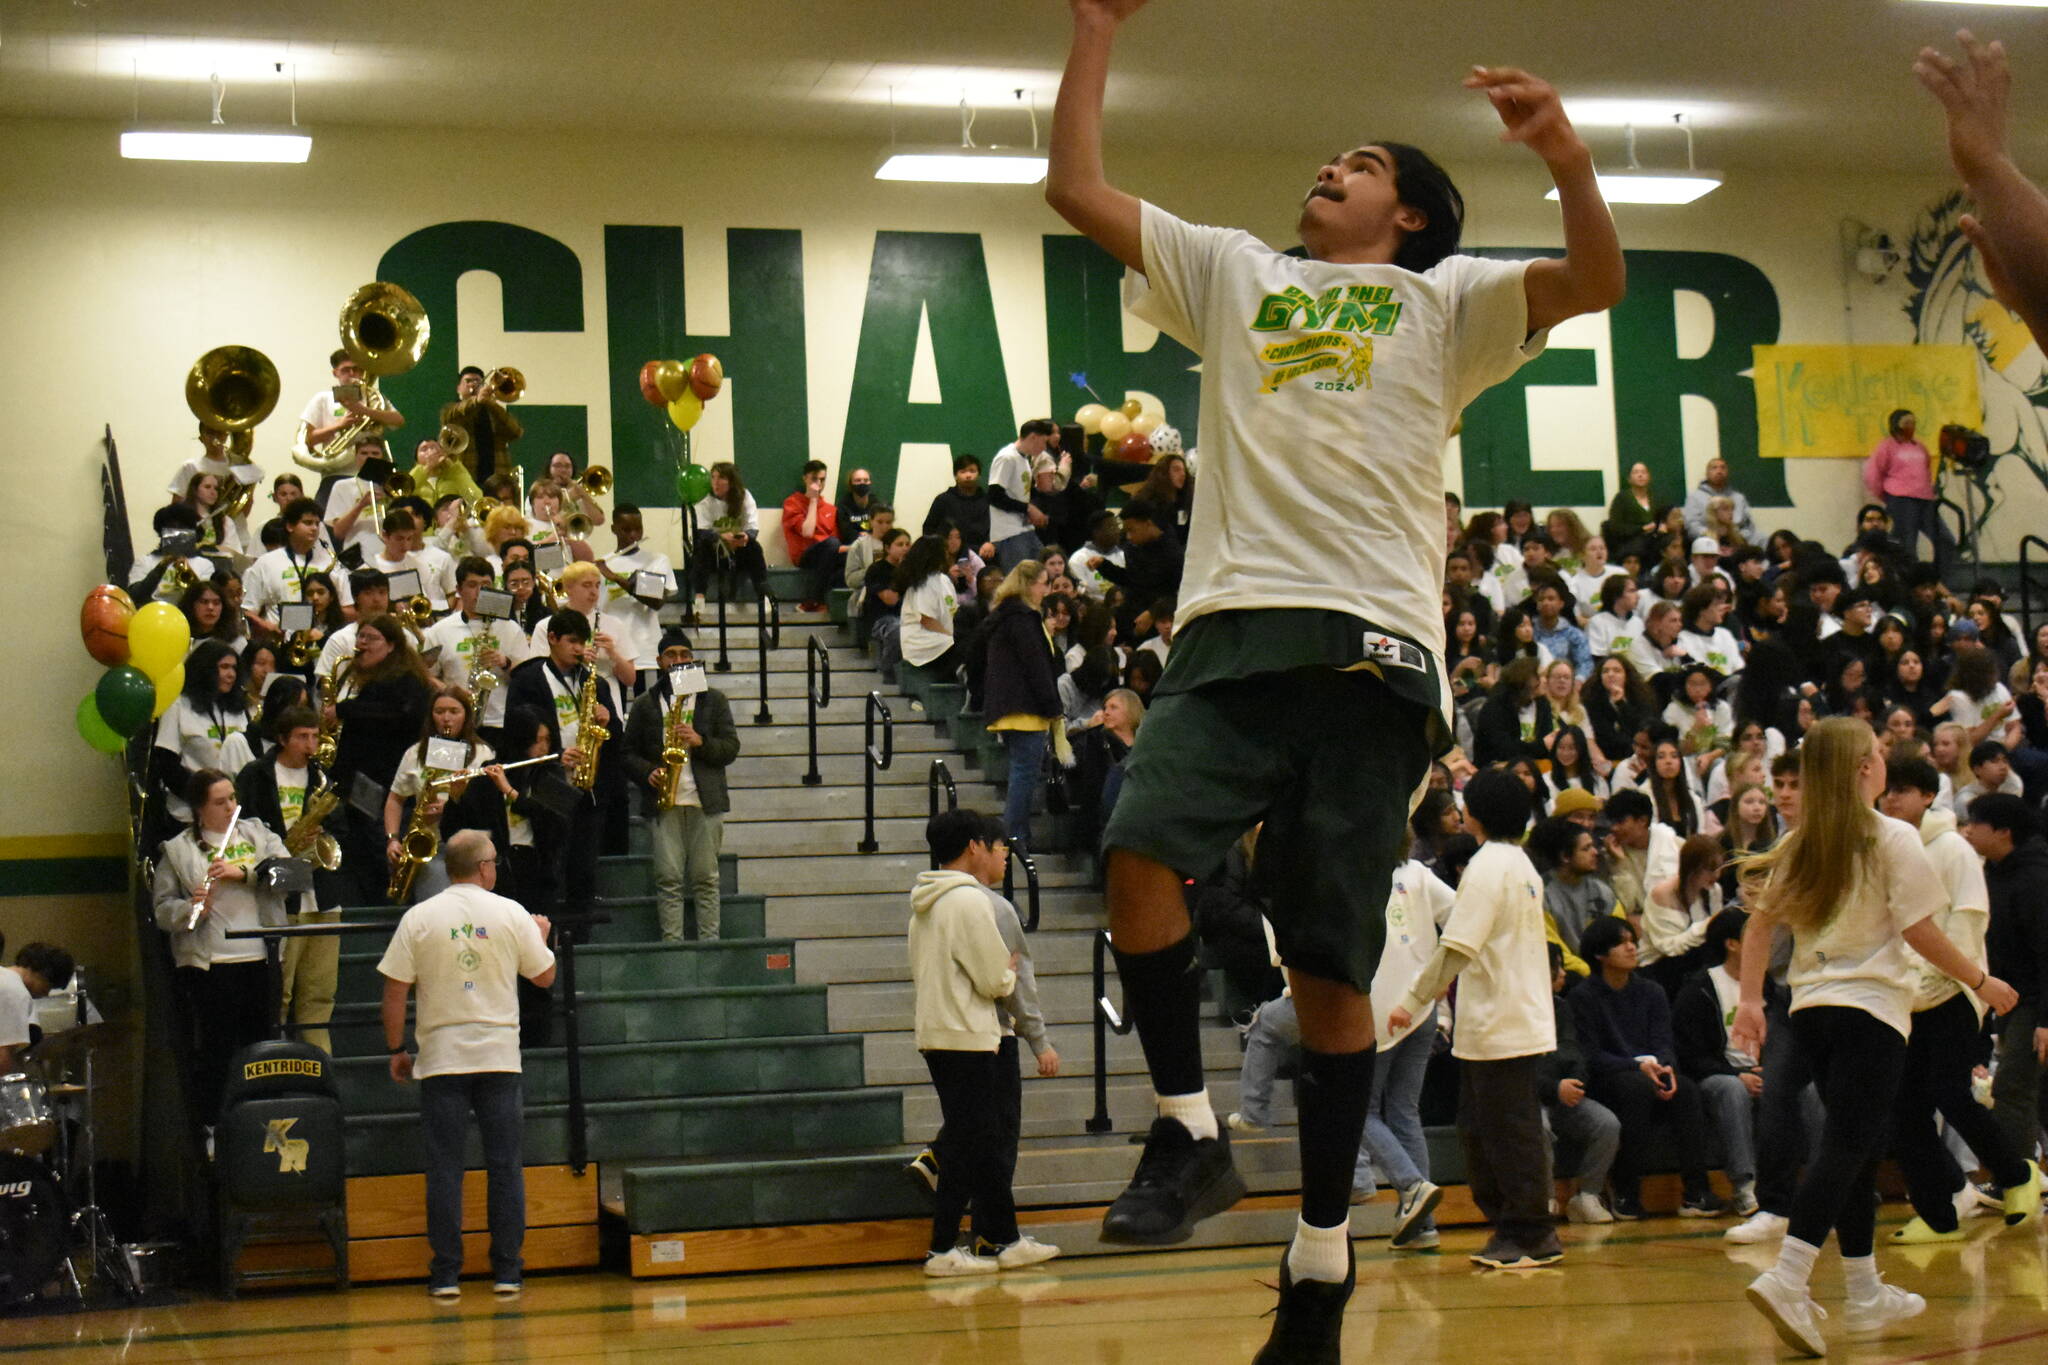 Photos by Ben Ray / The Reporter
Kentridge’s Orlando Ventura goes up for a lay-up during warm-ups.